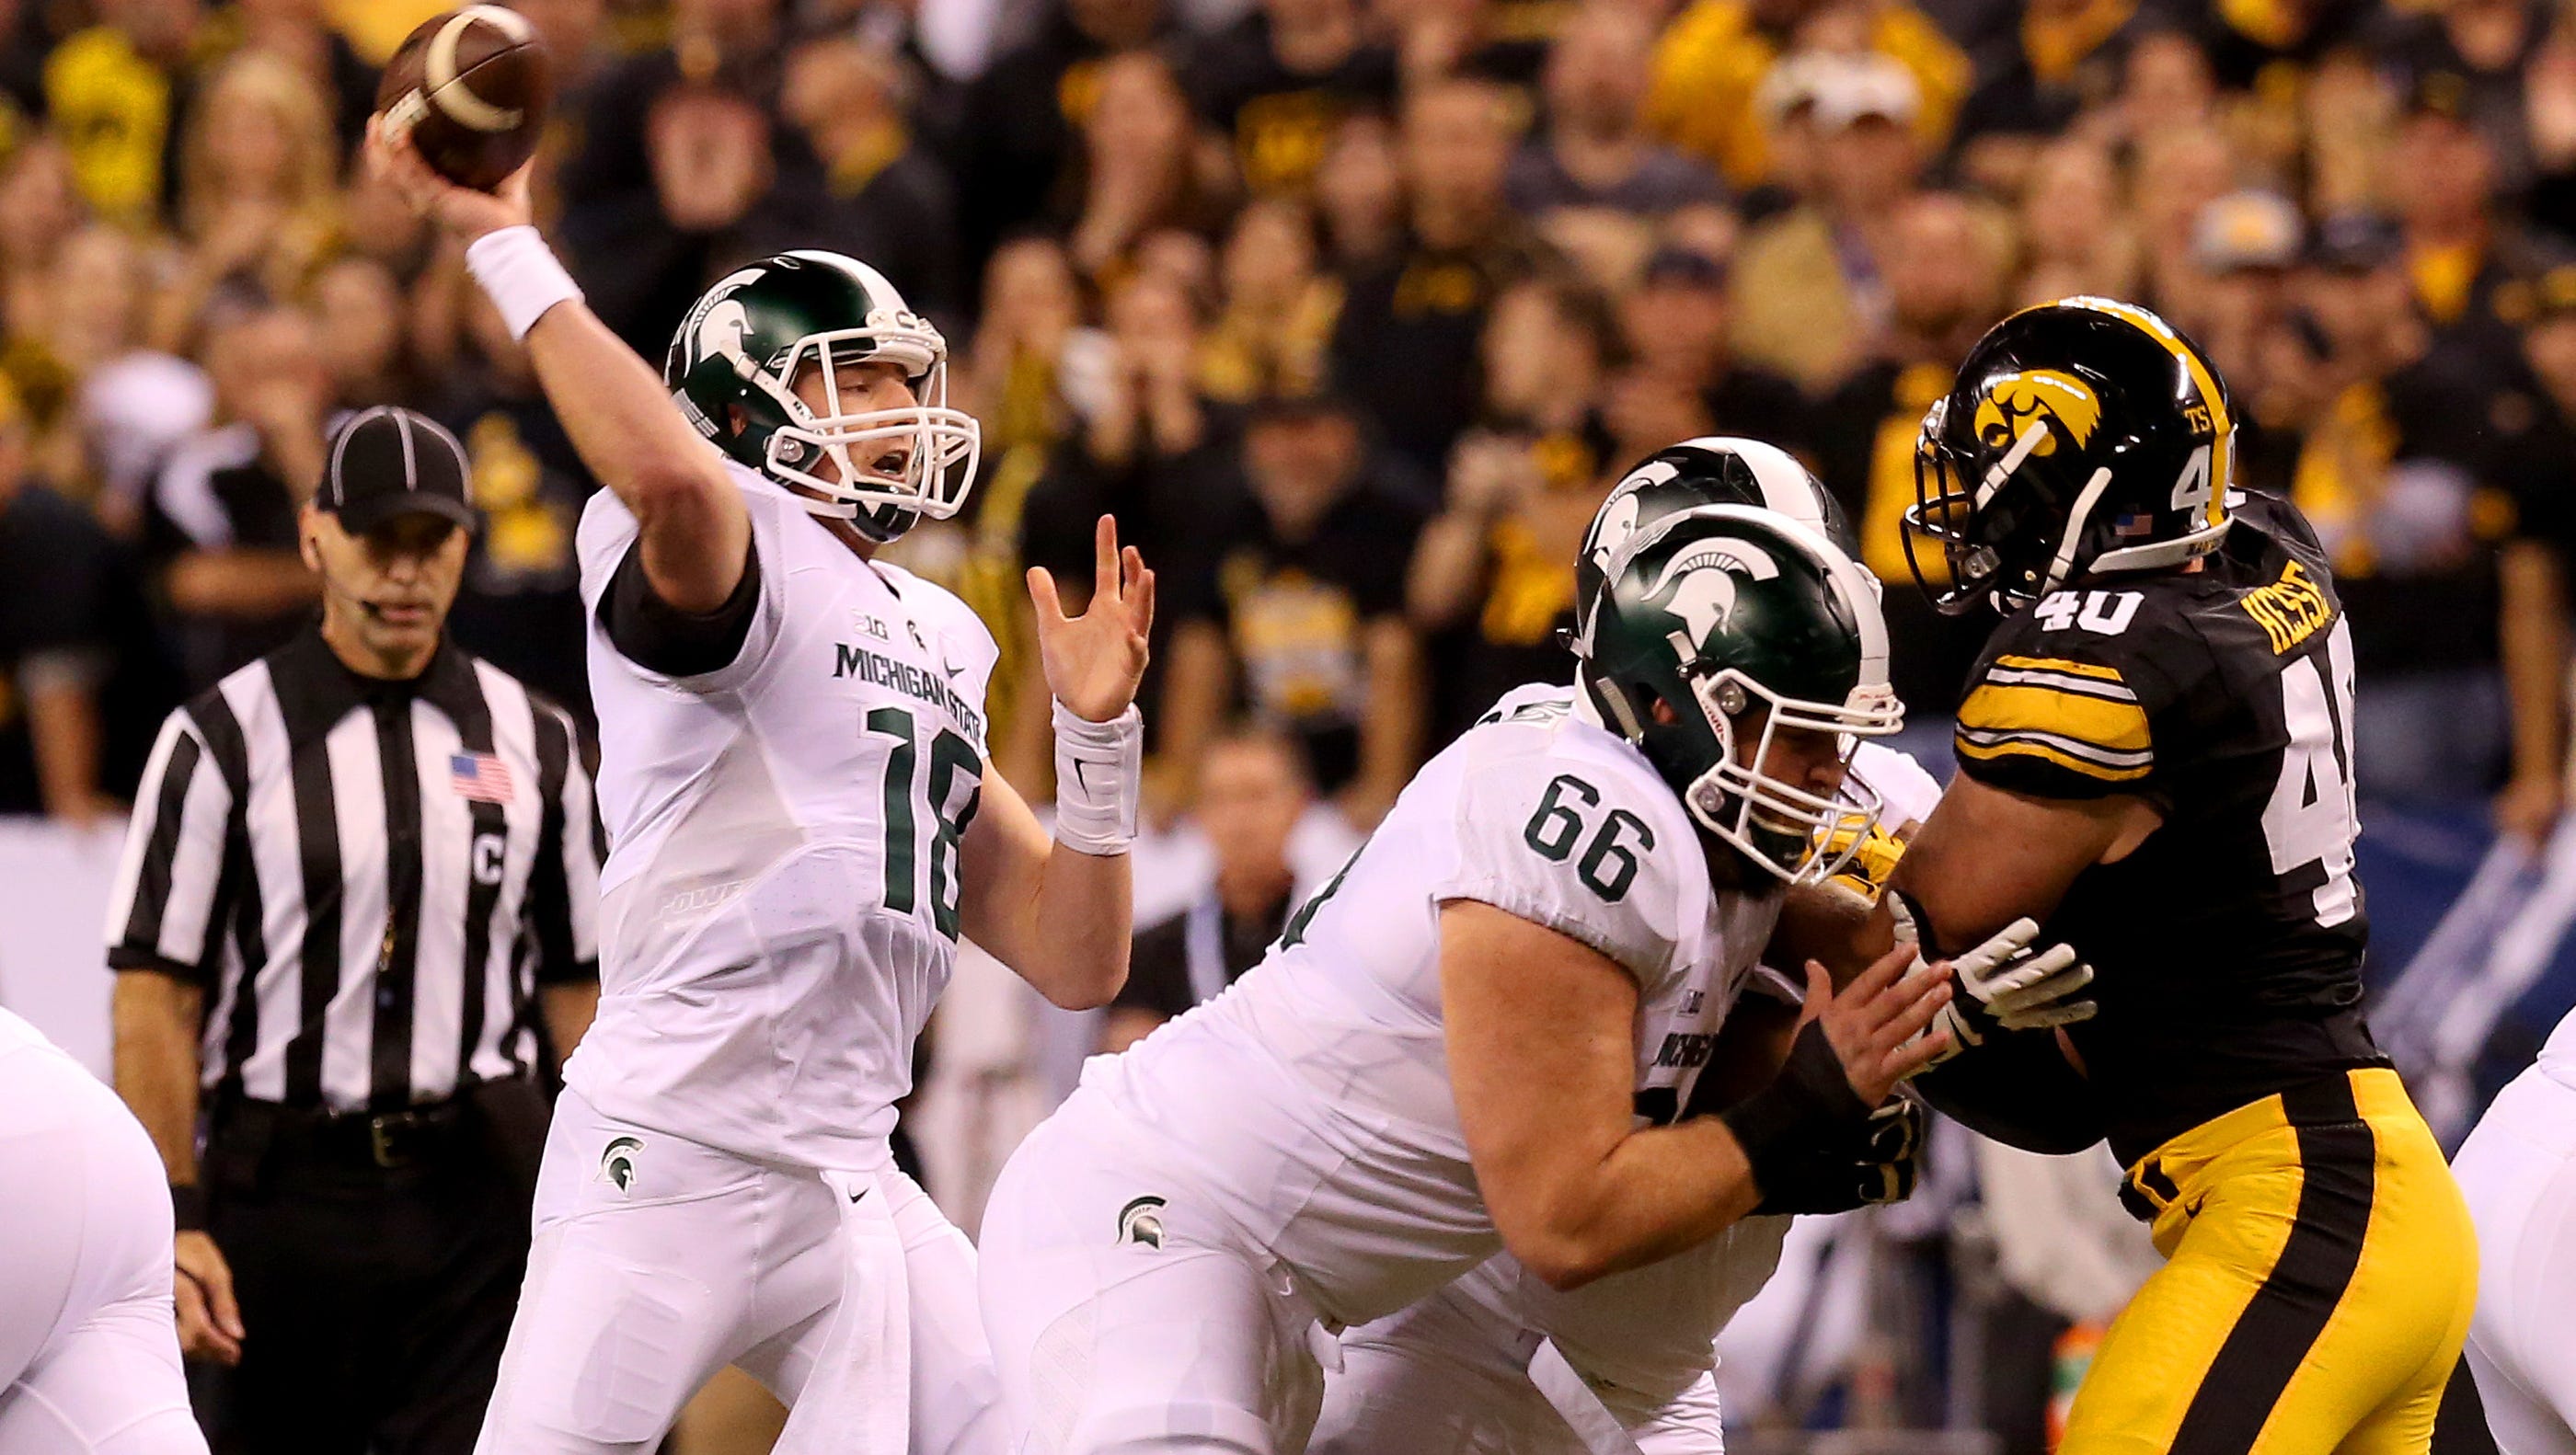 Michigan State quarterback Connor Cook (18) delivers a pass against Iowa during the Big Ten Championship Game at Lucas Oil Stadium on Dec. 5, 2015.